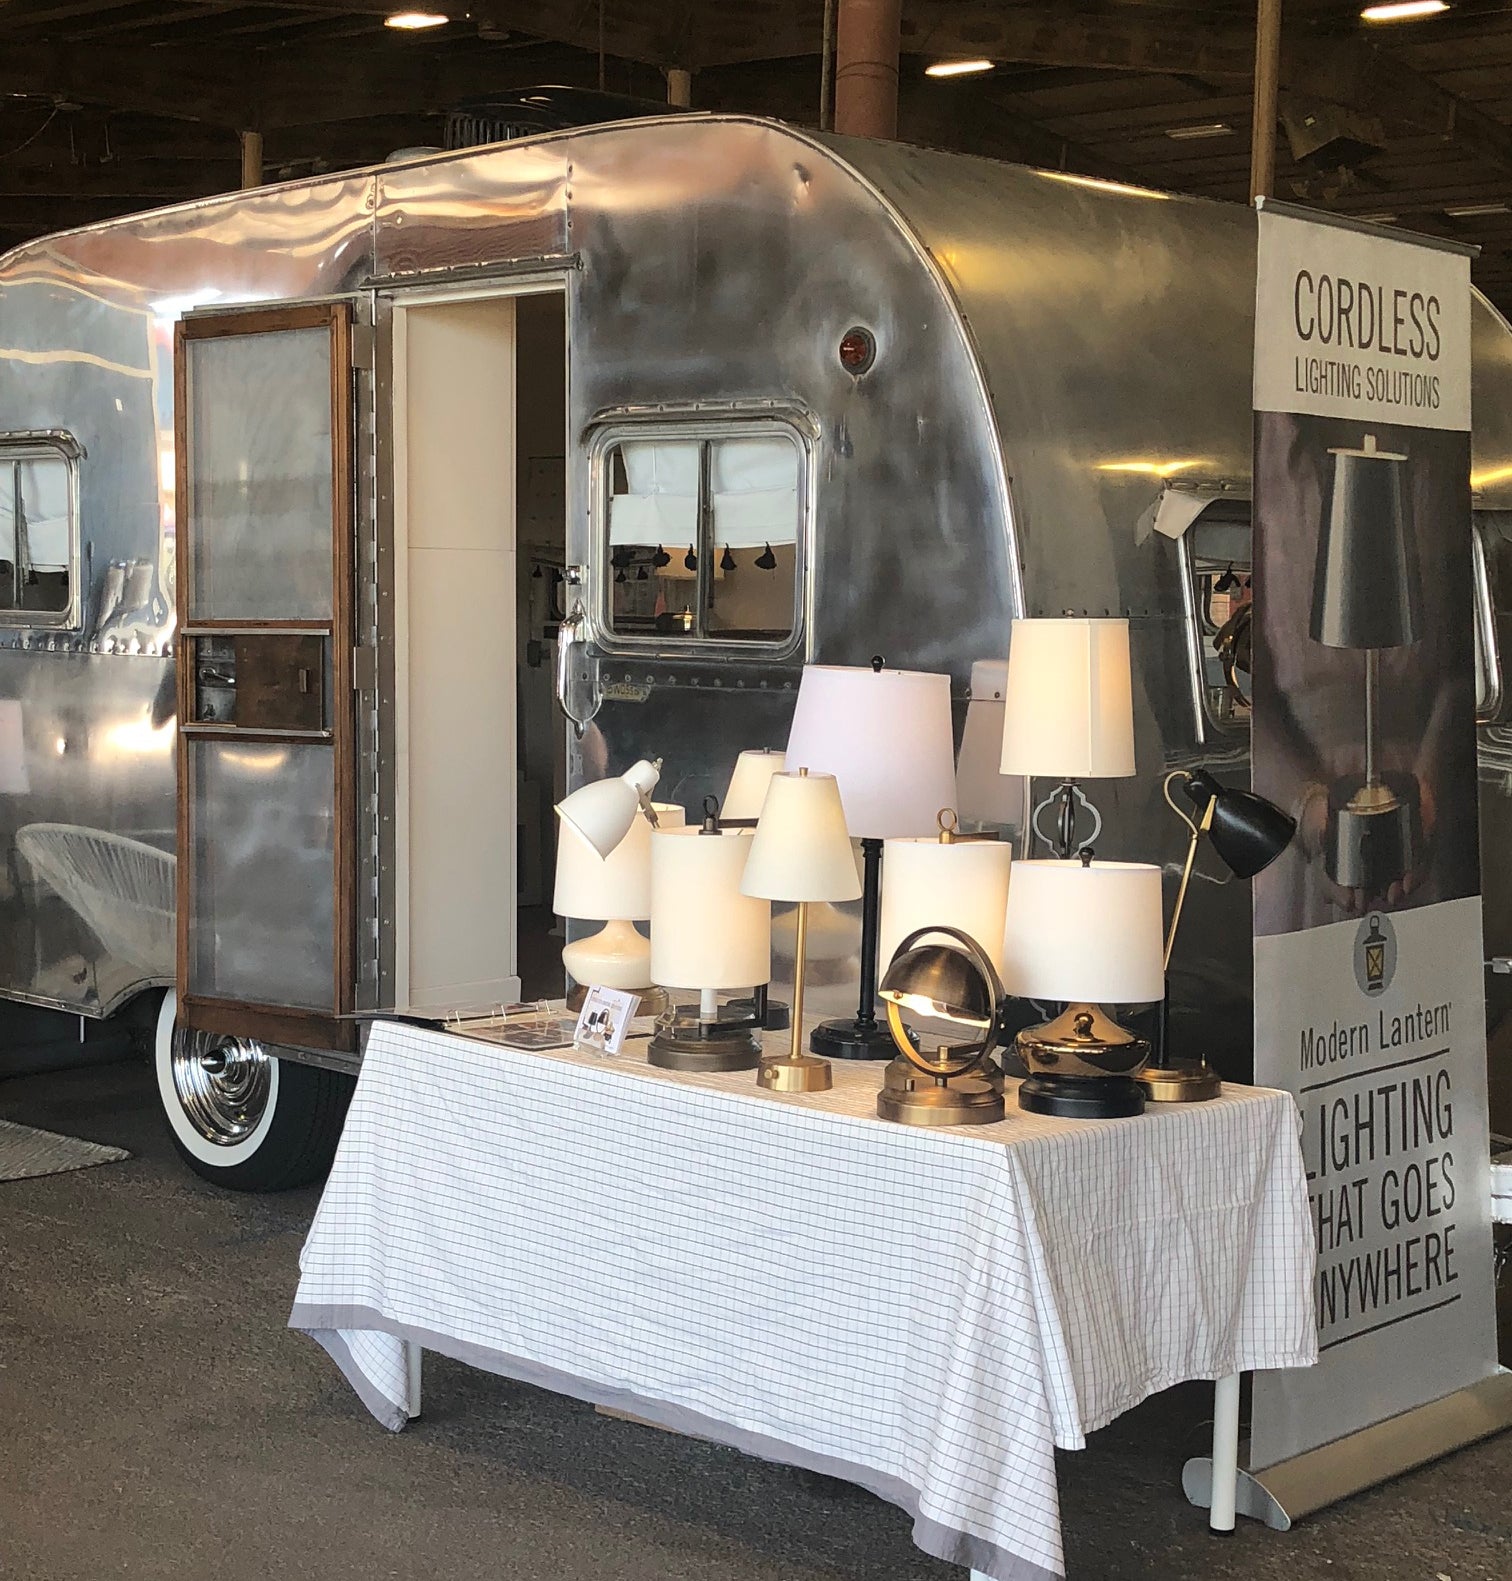 Vintage Camper with our Cordless Lamps by Modern Lantern